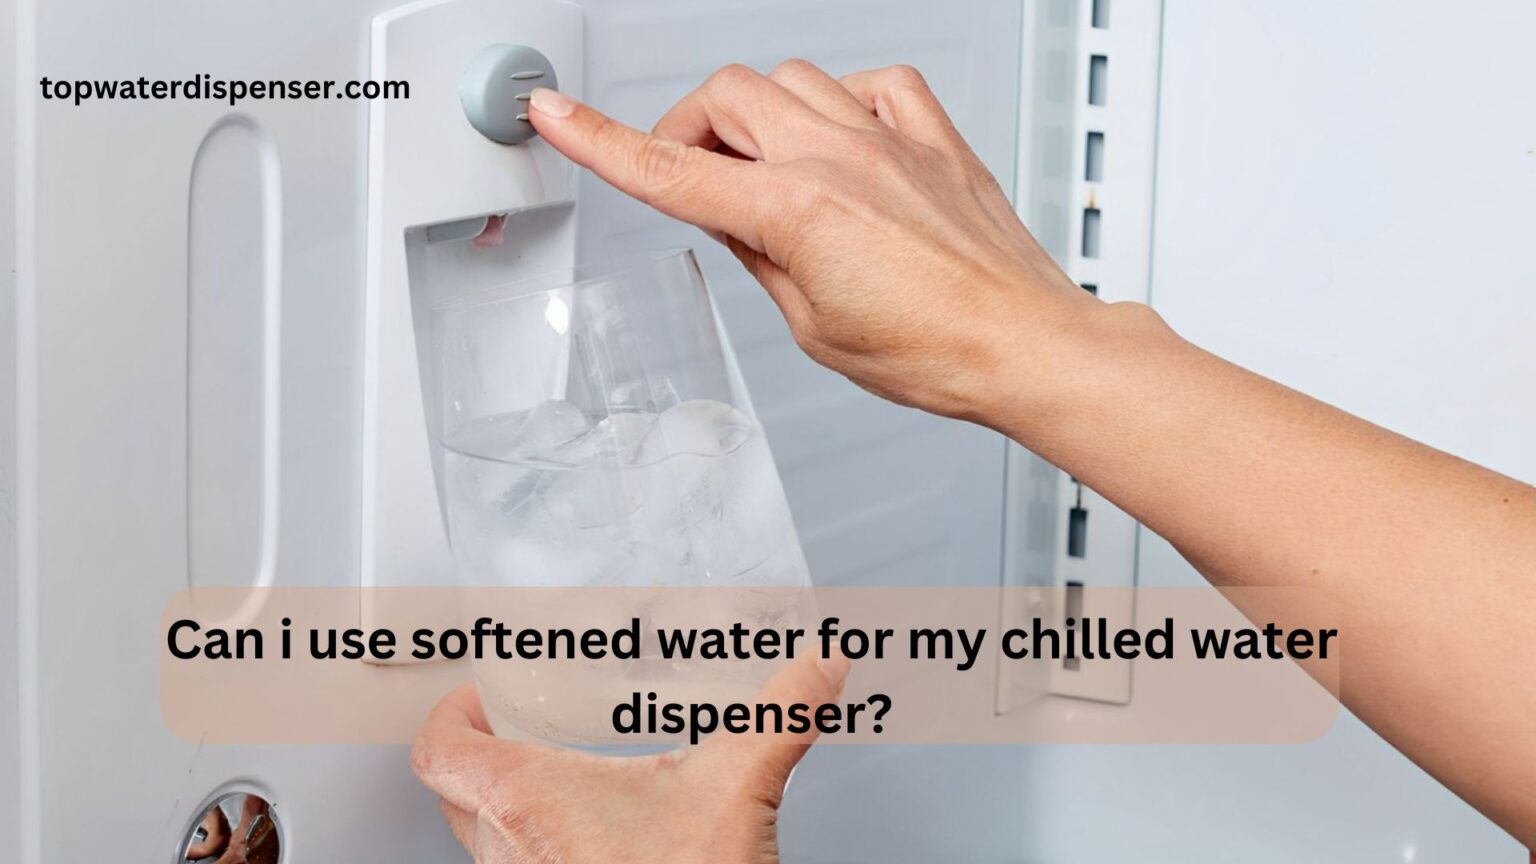 Can I use softened water for my chilled water dispenser?